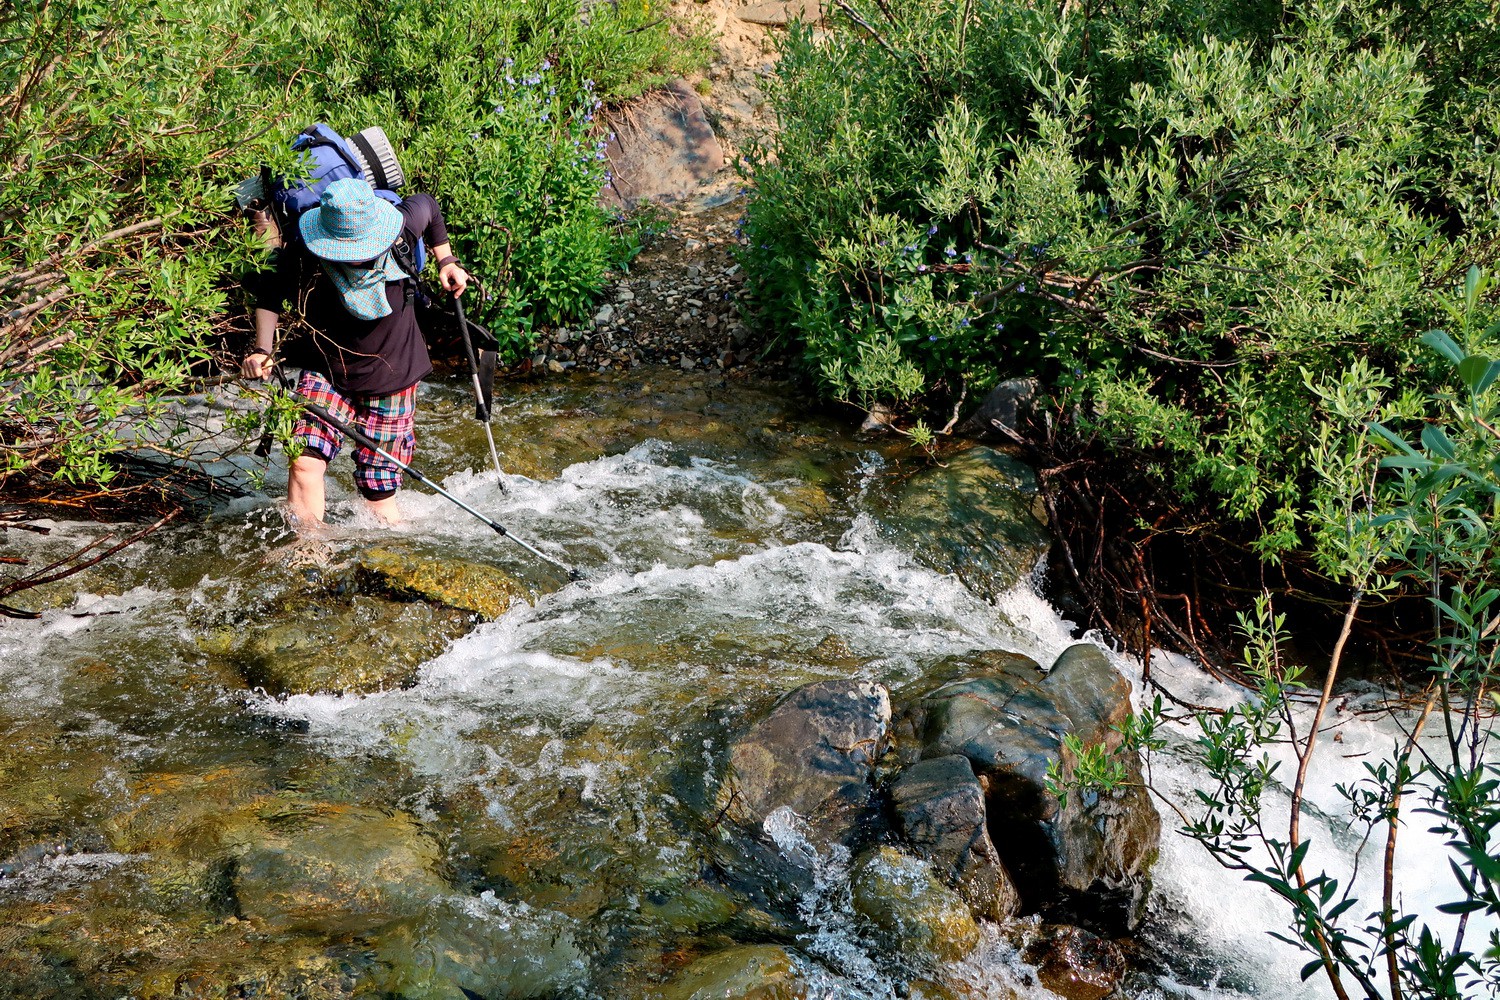 Crossing the stream with a heavy backpack